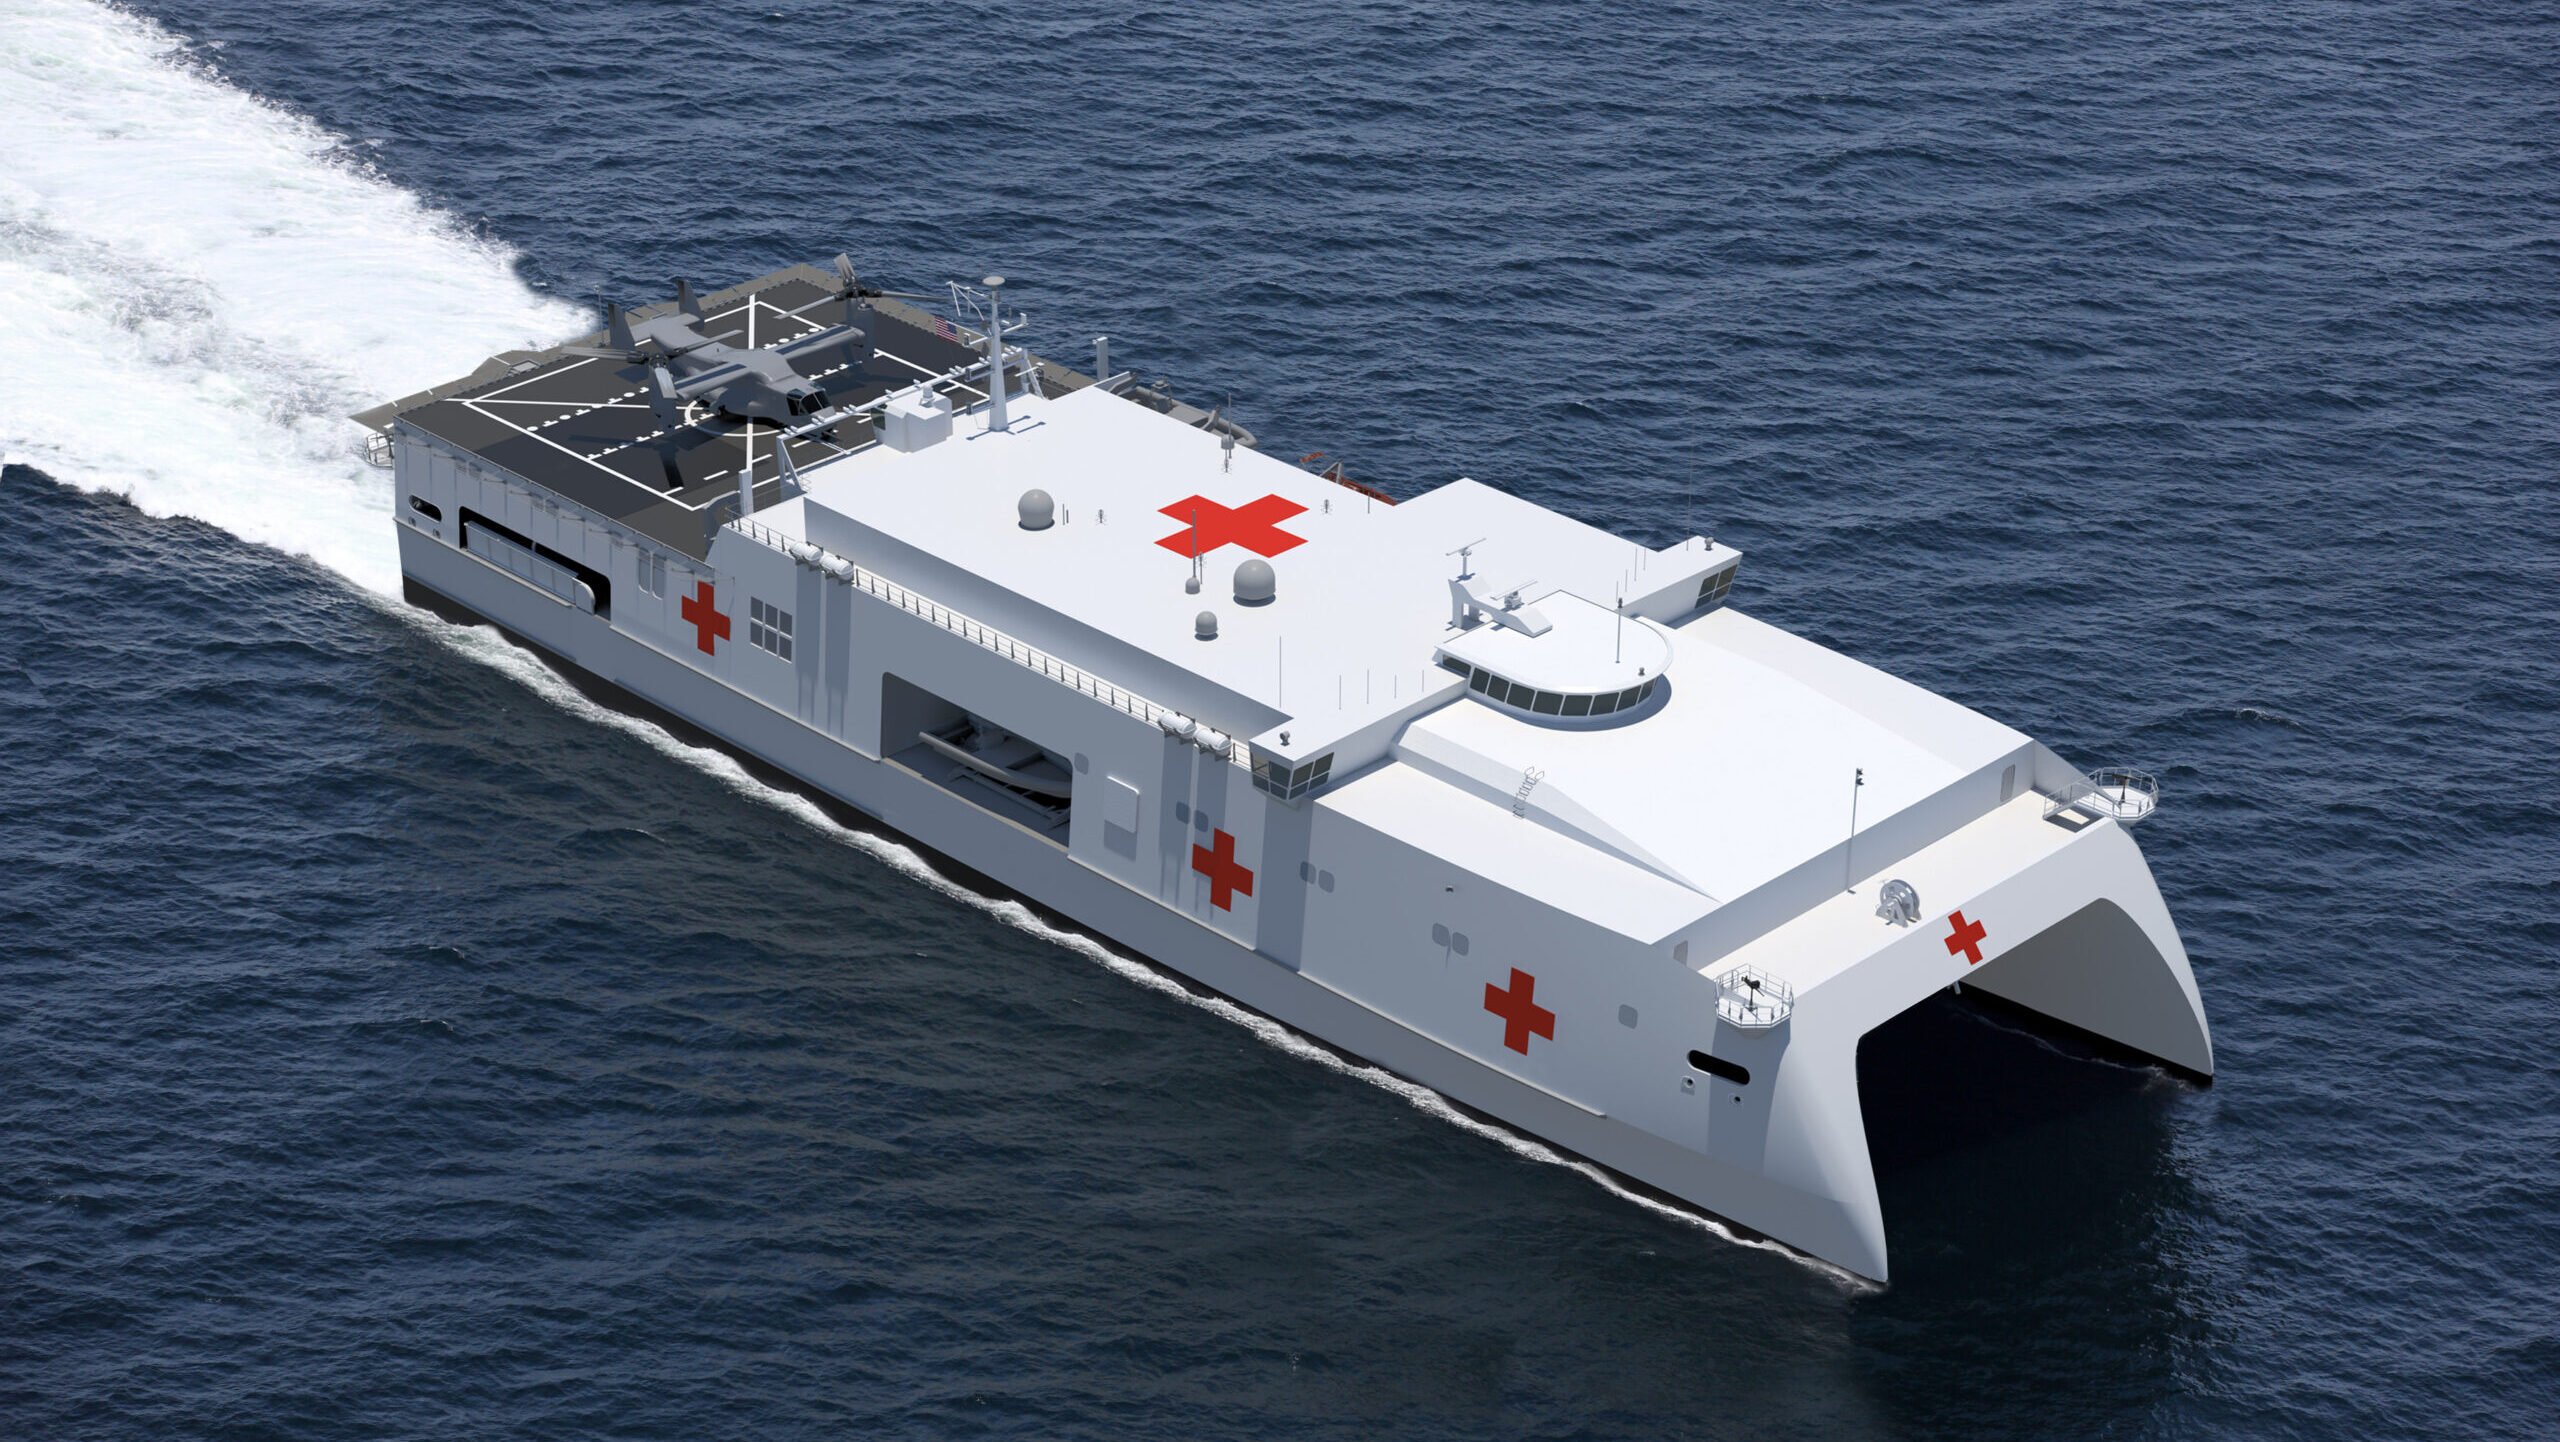 With new $867M contract, Austal begins work on replacements for Navy’s storied hospital ships